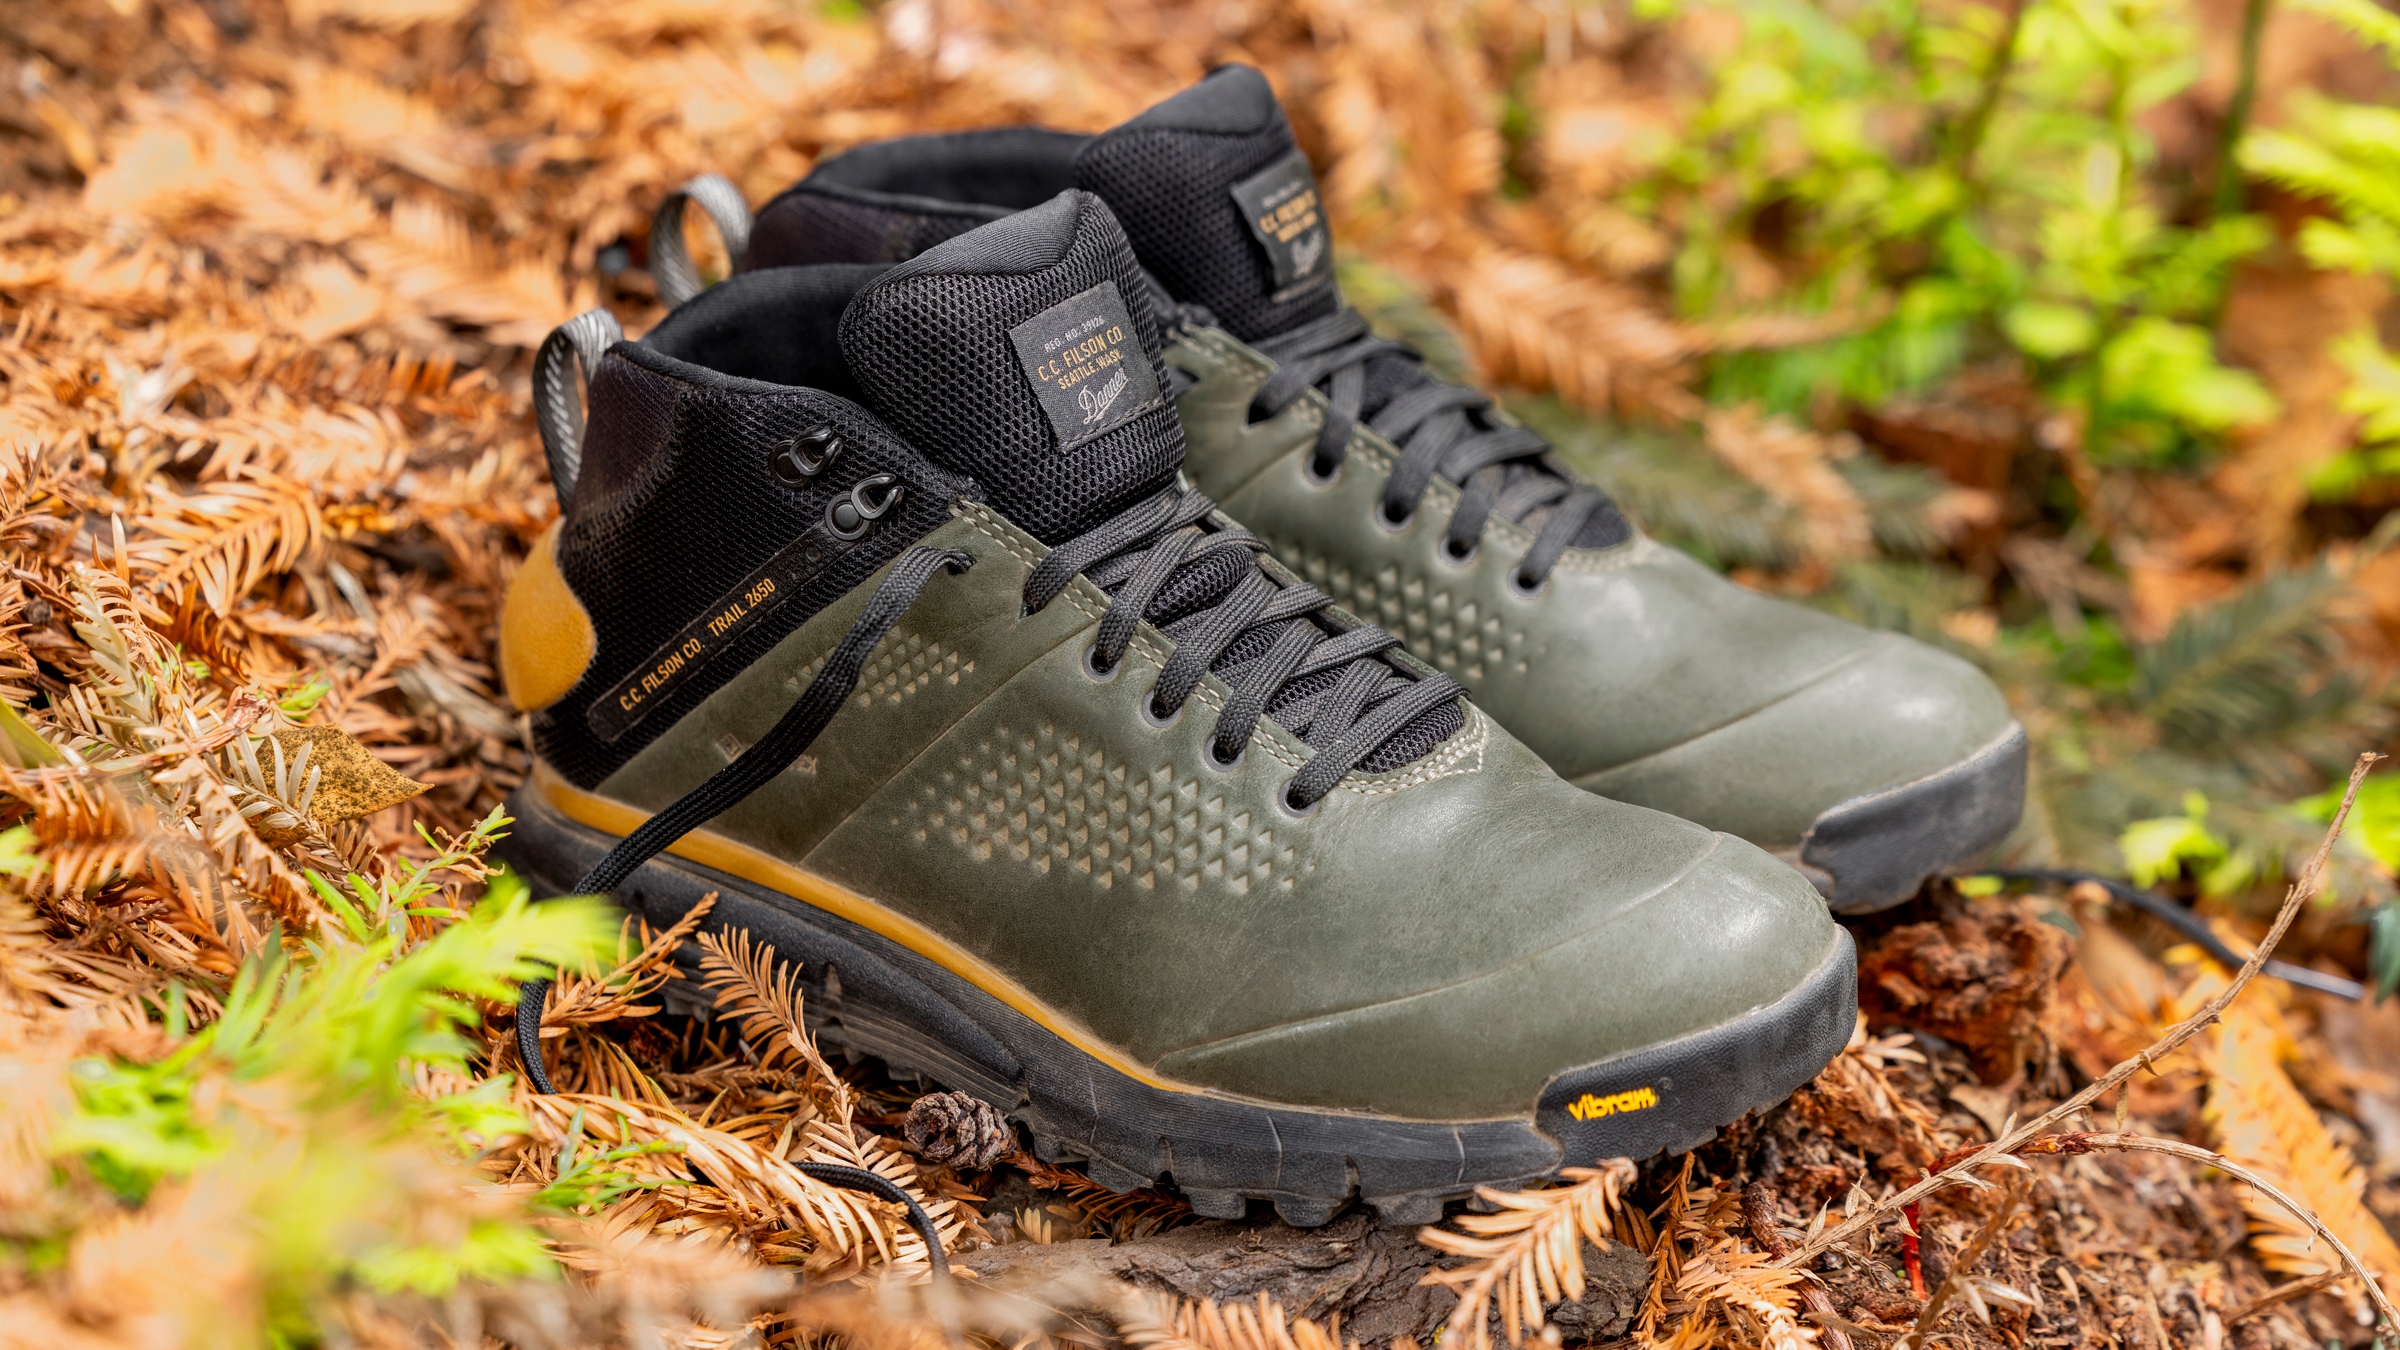 New Limited-Edition Trail 2650 MID from Filson And Danner